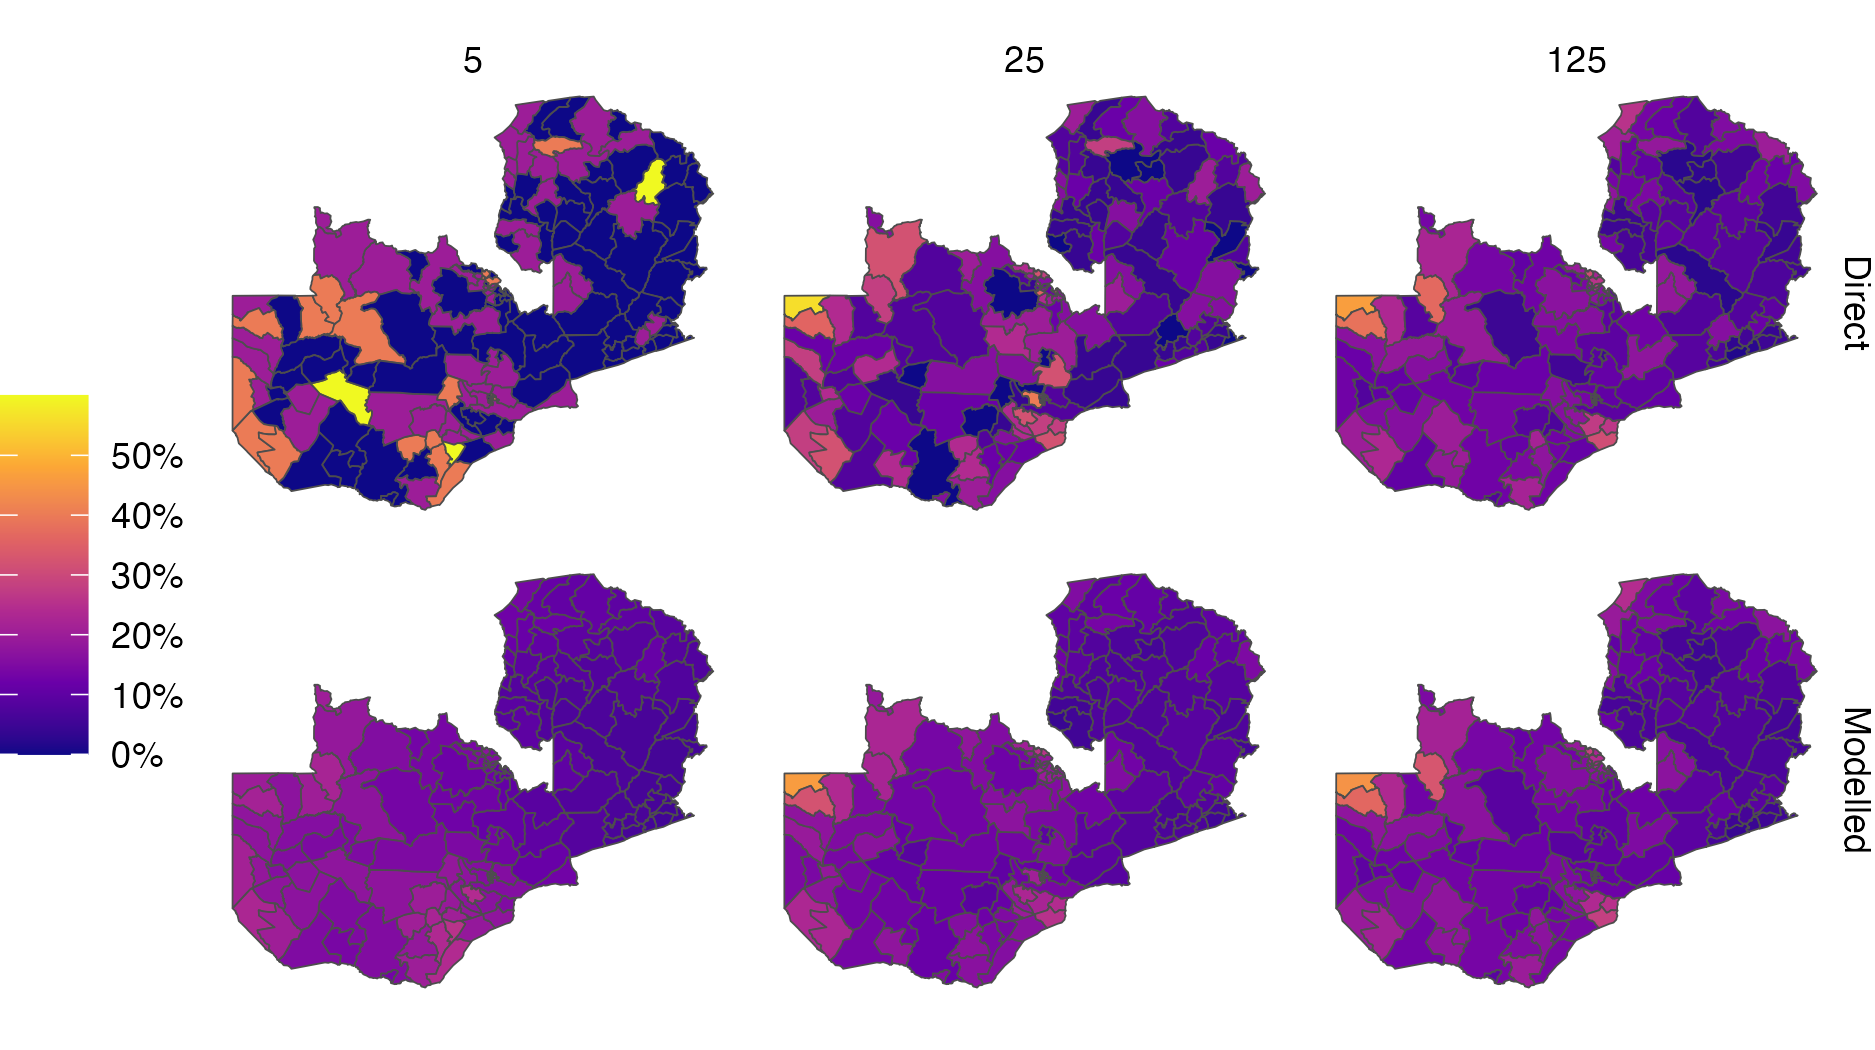 Simulation of a simple random sample \(y_i \sim \text{Bin}(m, p_i)\) with varying sample size \(m = 5, 25, 125\) in each of the \(i = 1, \ldots, 156\) constituencies of Zambia. Direct estimates were obtained by the empirical ratio of data to sample size. Modelled estimates were obtained using a logistic regression with linear predictor given by an intercept and a spatial random effect. Estimates of HIV indicators for Zambia have previously been generated at the district-level, comprising 116 spatial units. Moving forward, there is interest in generating estimates at the higher-resolution constituency level, as program planning is devolved locally. The viridis colour palette, as implemented by the viridis R package (Garnier et al. 2023), was used in this figure. It is used often throughout this thesis because it is perceptually uniform and accessible to colourblind viewers (Smith and Walt 2015). This figure was adapted from a presentation given for the Zambia HIV Estimates Technical Working Group, available from https://github.com/athowes/zambia-unaids.